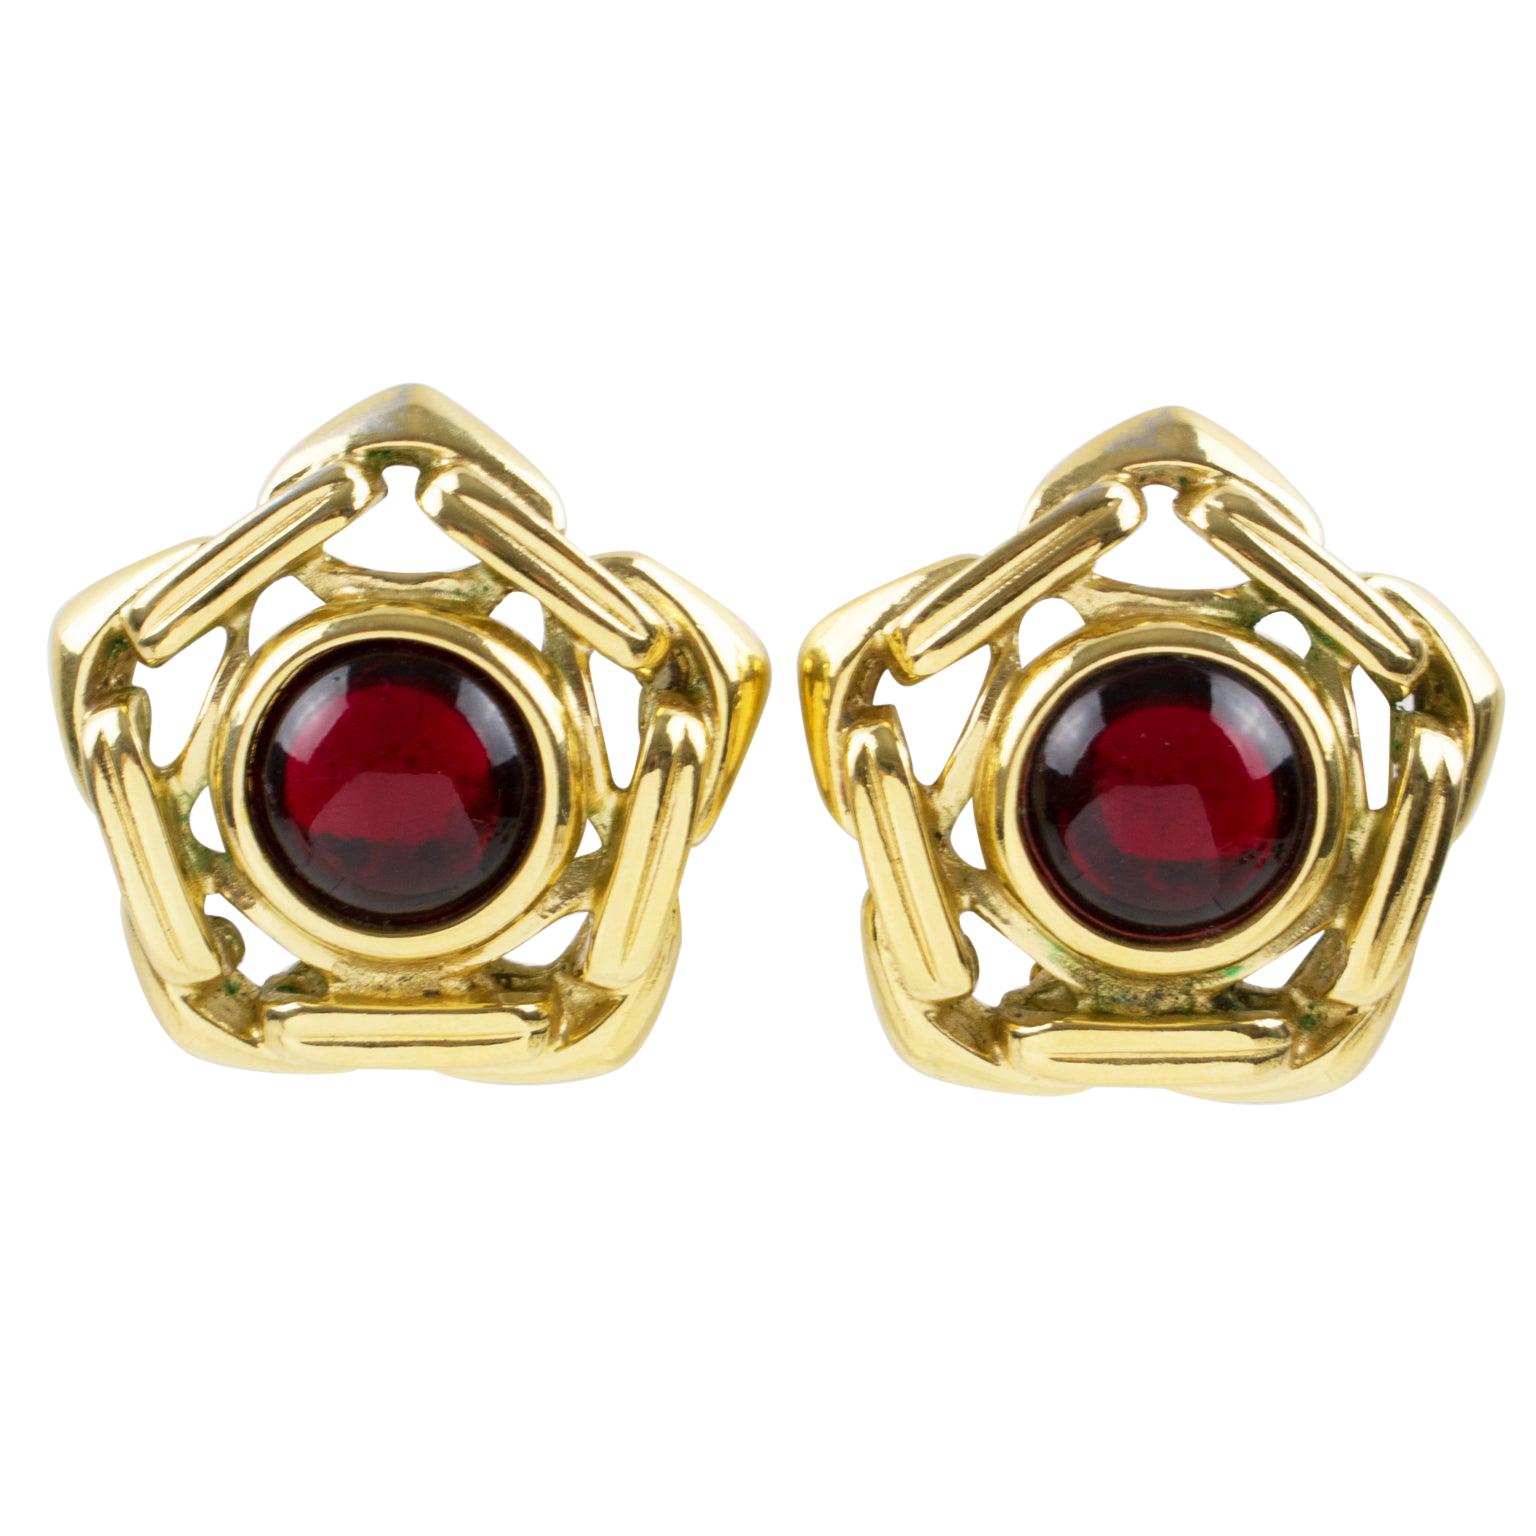 Yves Saint Laurent YSL Clip Earrings Ruby Red Cabochon